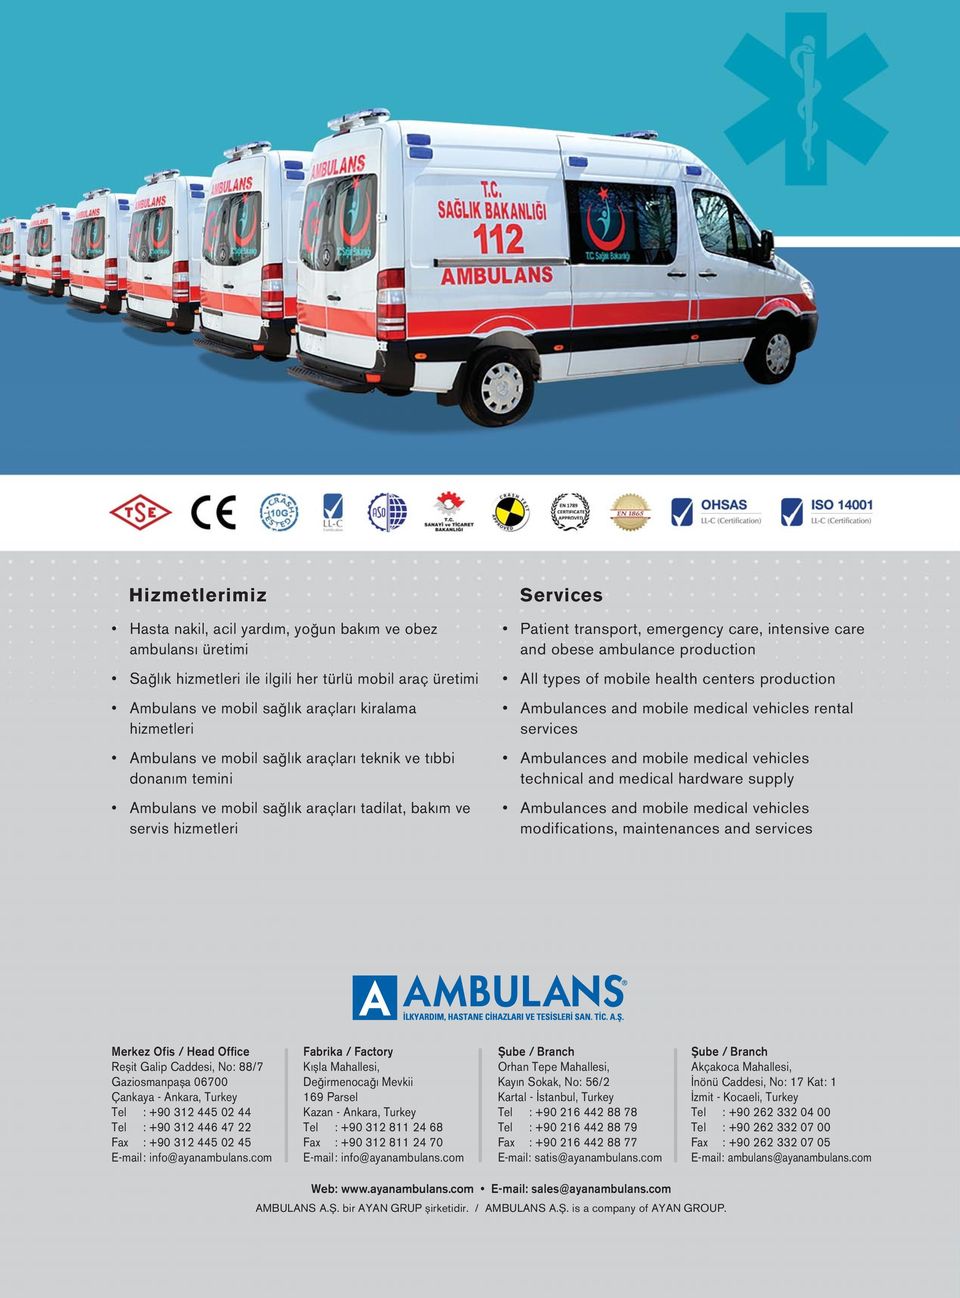 ambulance production All types of mobile health centers production Ambulances and mobile medical vehicles rental services Ambulances and mobile medical vehicles technical and medical hardware supply